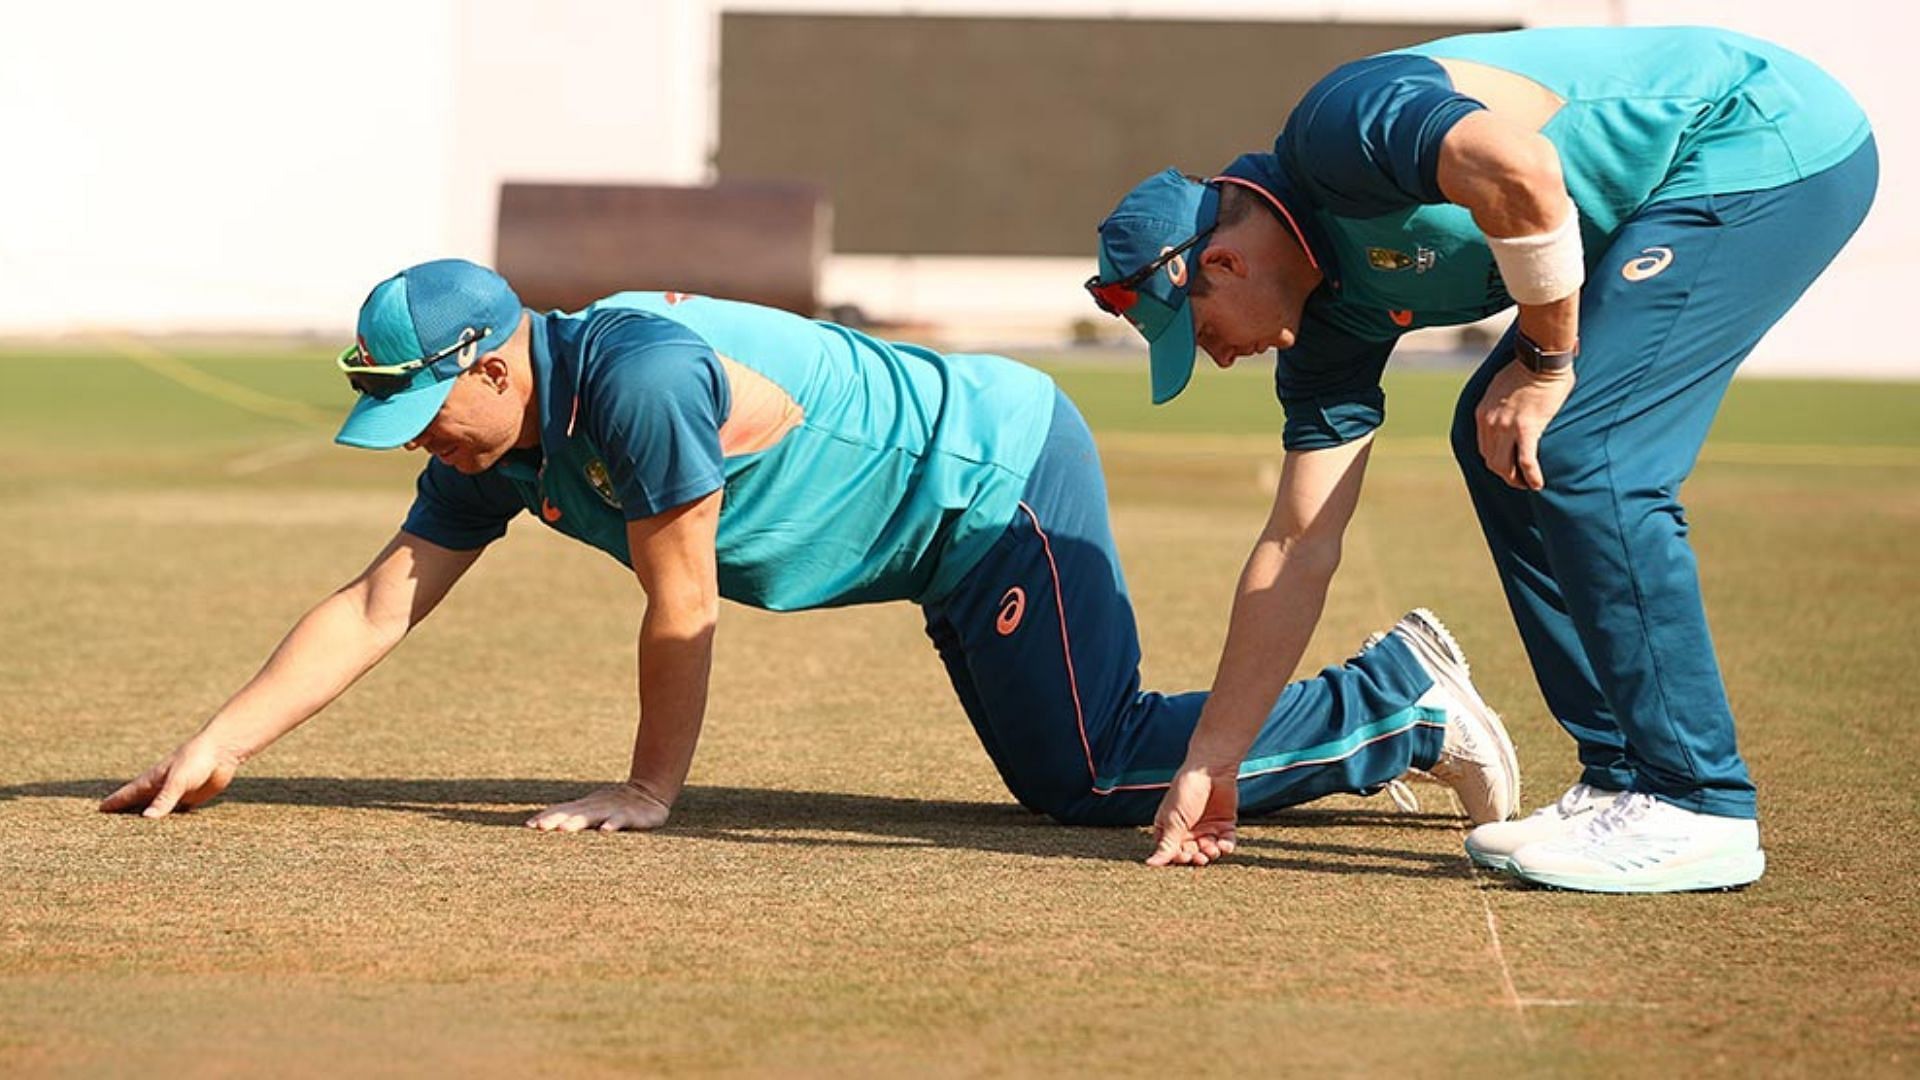 Australian batters David Warner and Steve Smith checking the Nagpur pitch. (P.C.:Twitter)